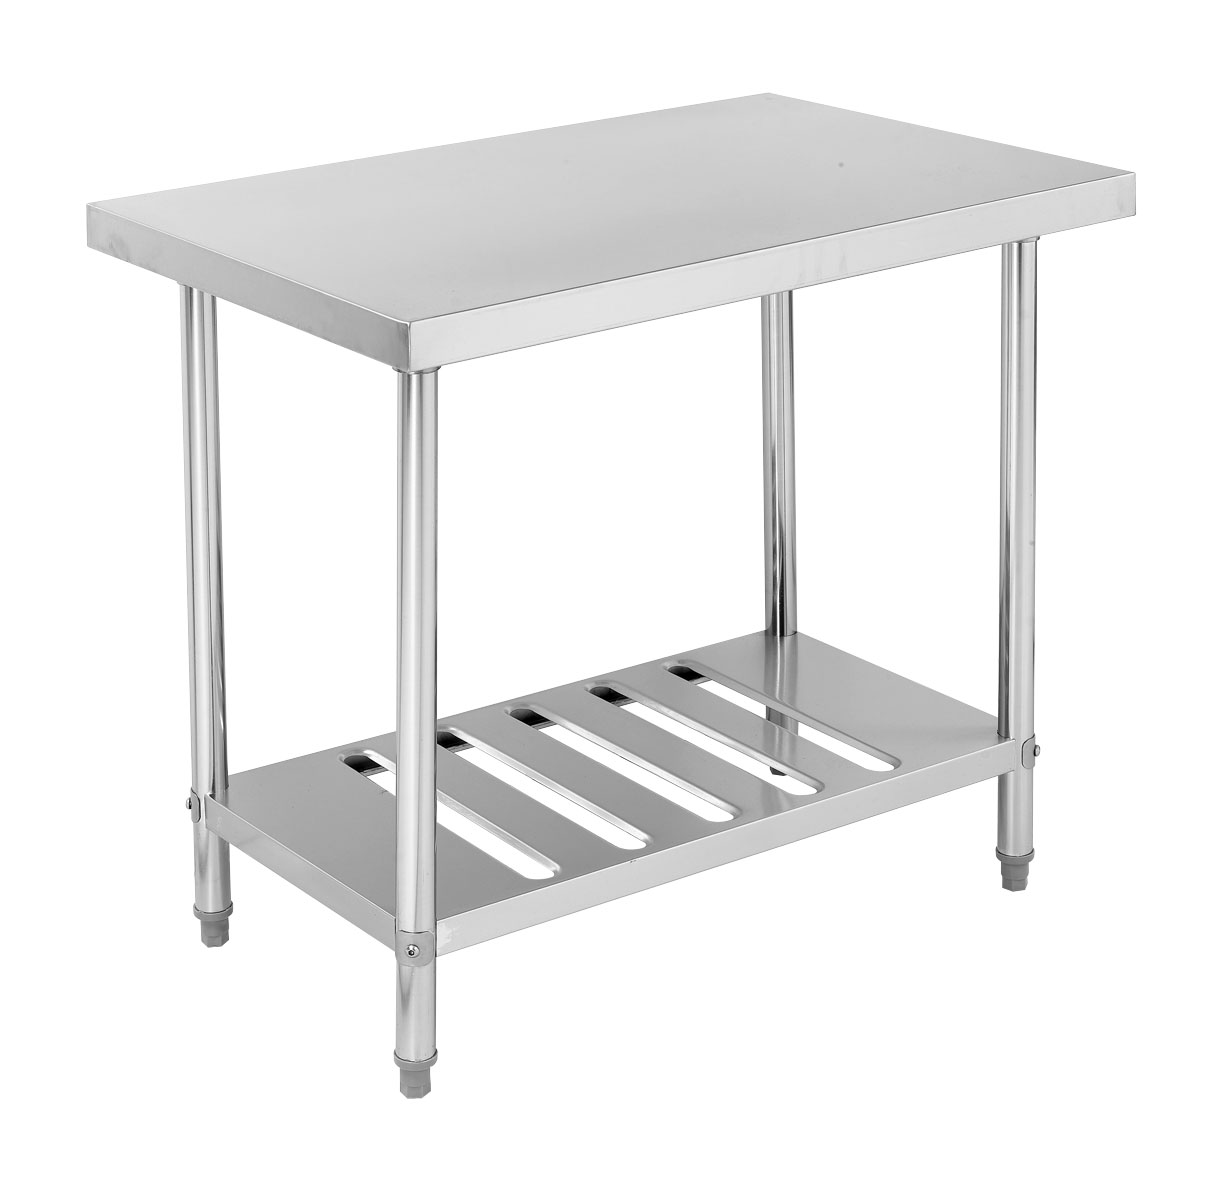 Catering preparation table Buffet catering food prep work bench 1800x600mm